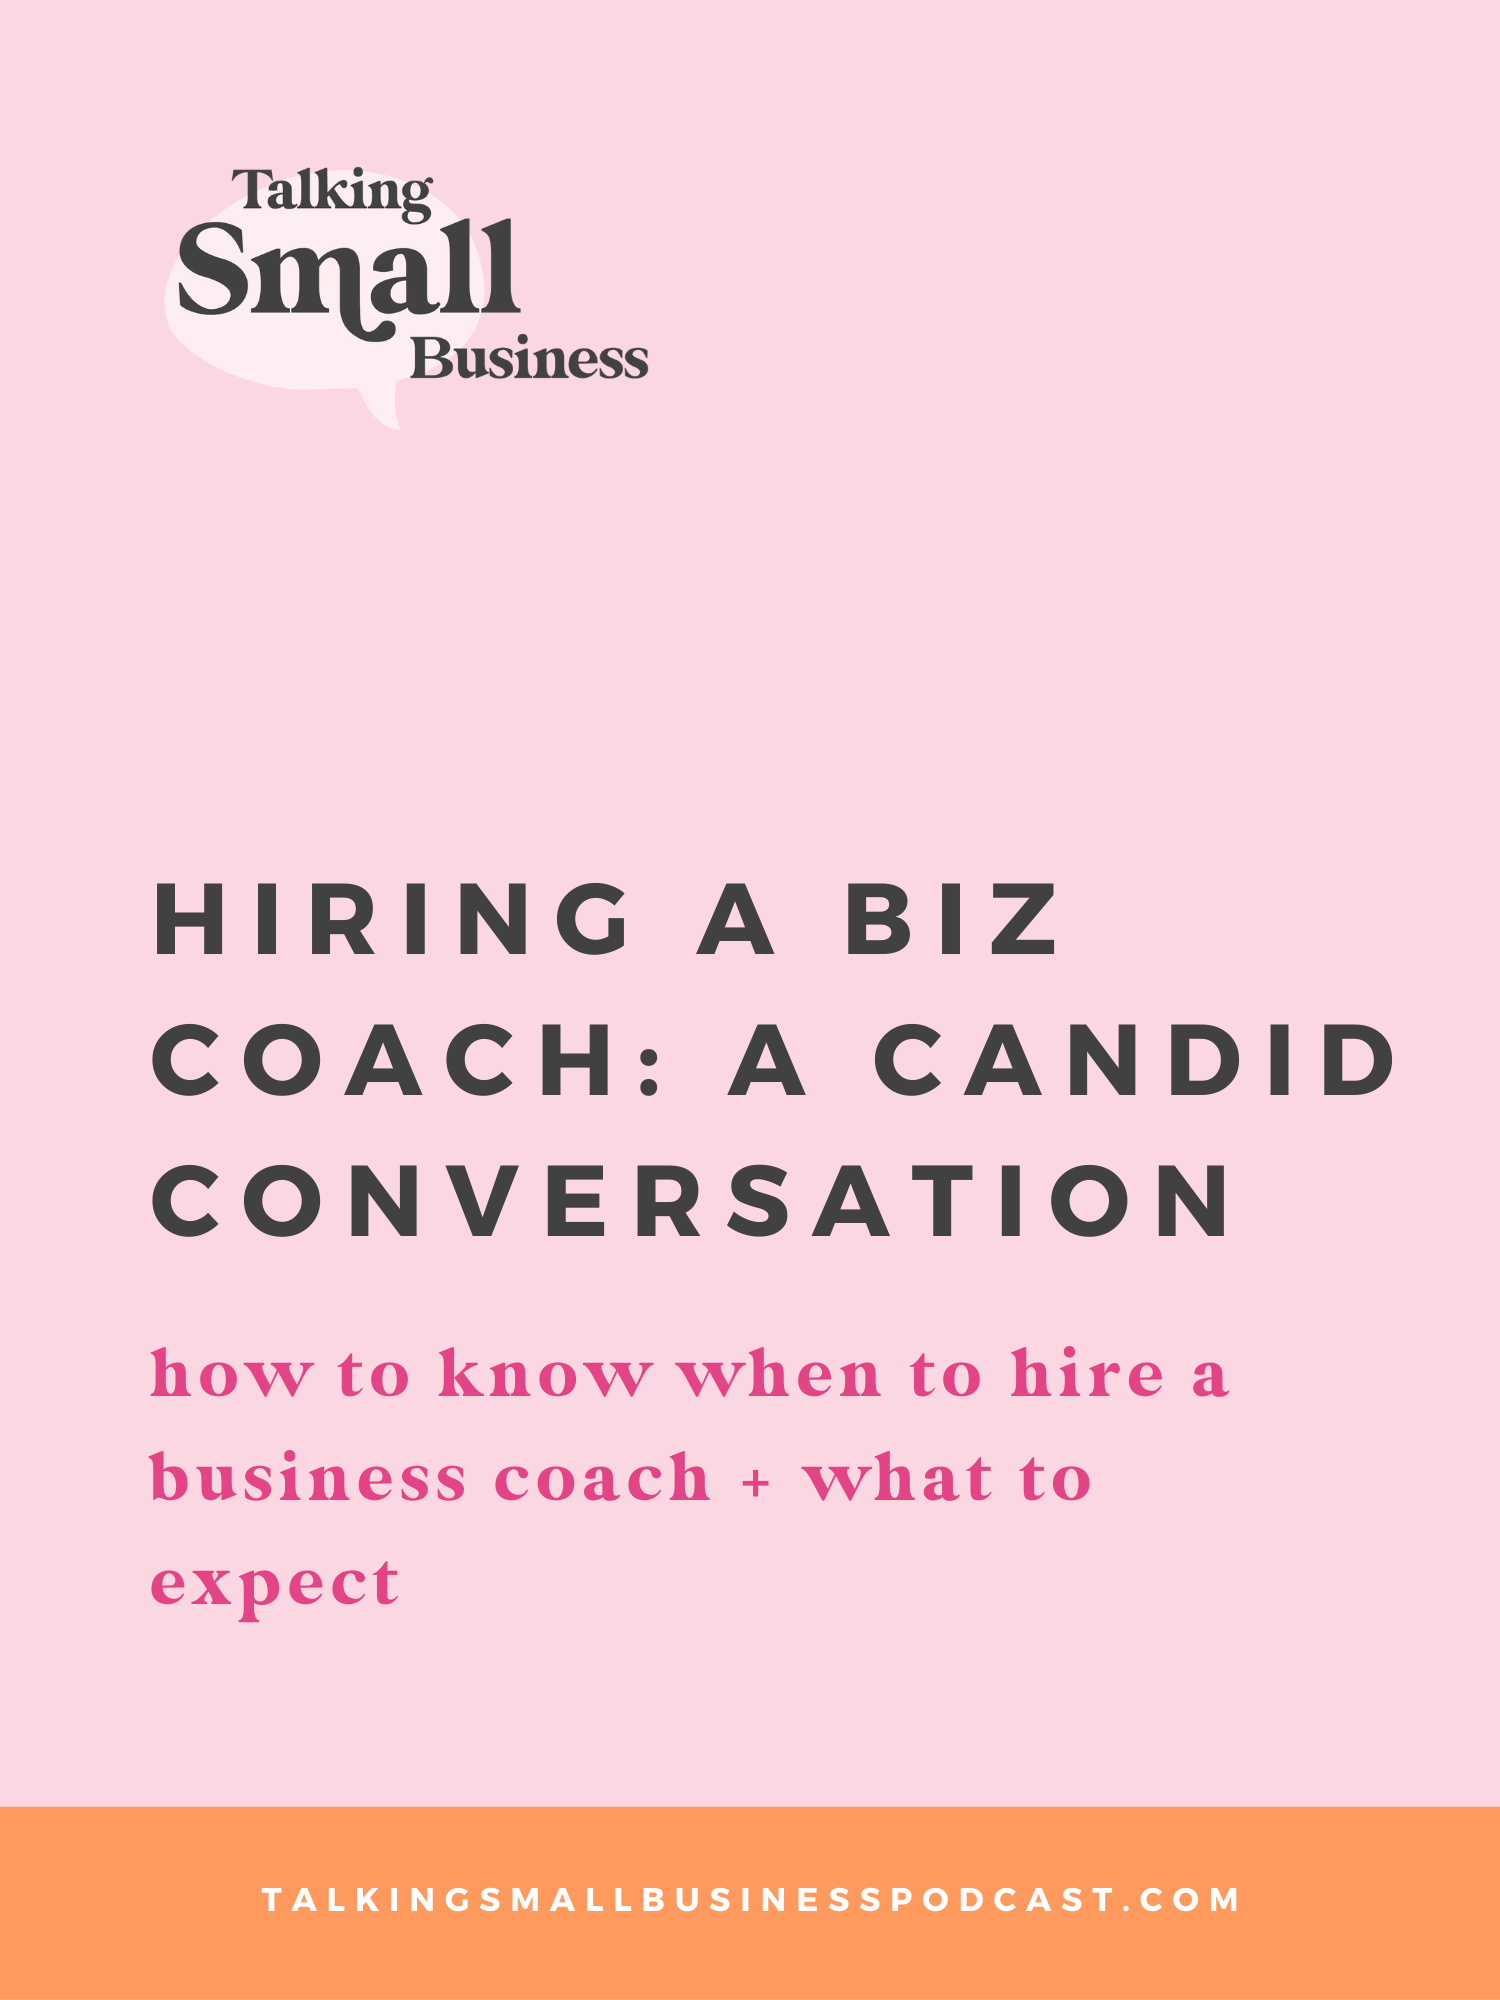 Hiring a Biz Coach: A Candid Conversation Business Coaching on the Talking Small Business podcast with Megan Martin and Kat Schmoyer